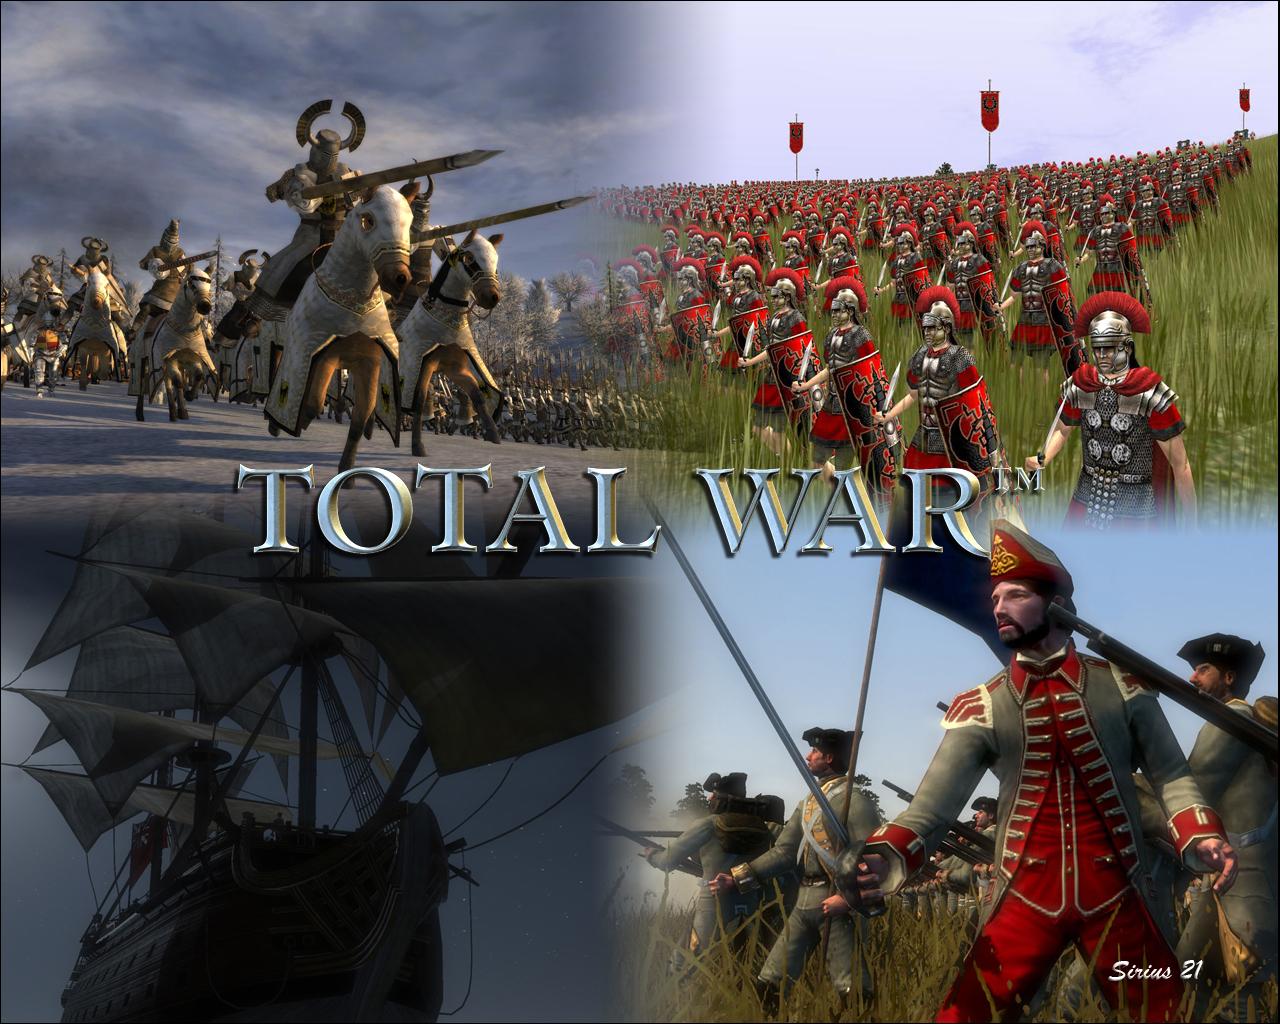 Empire: Total War free Wallpapers (24 photos) for your desktop ...